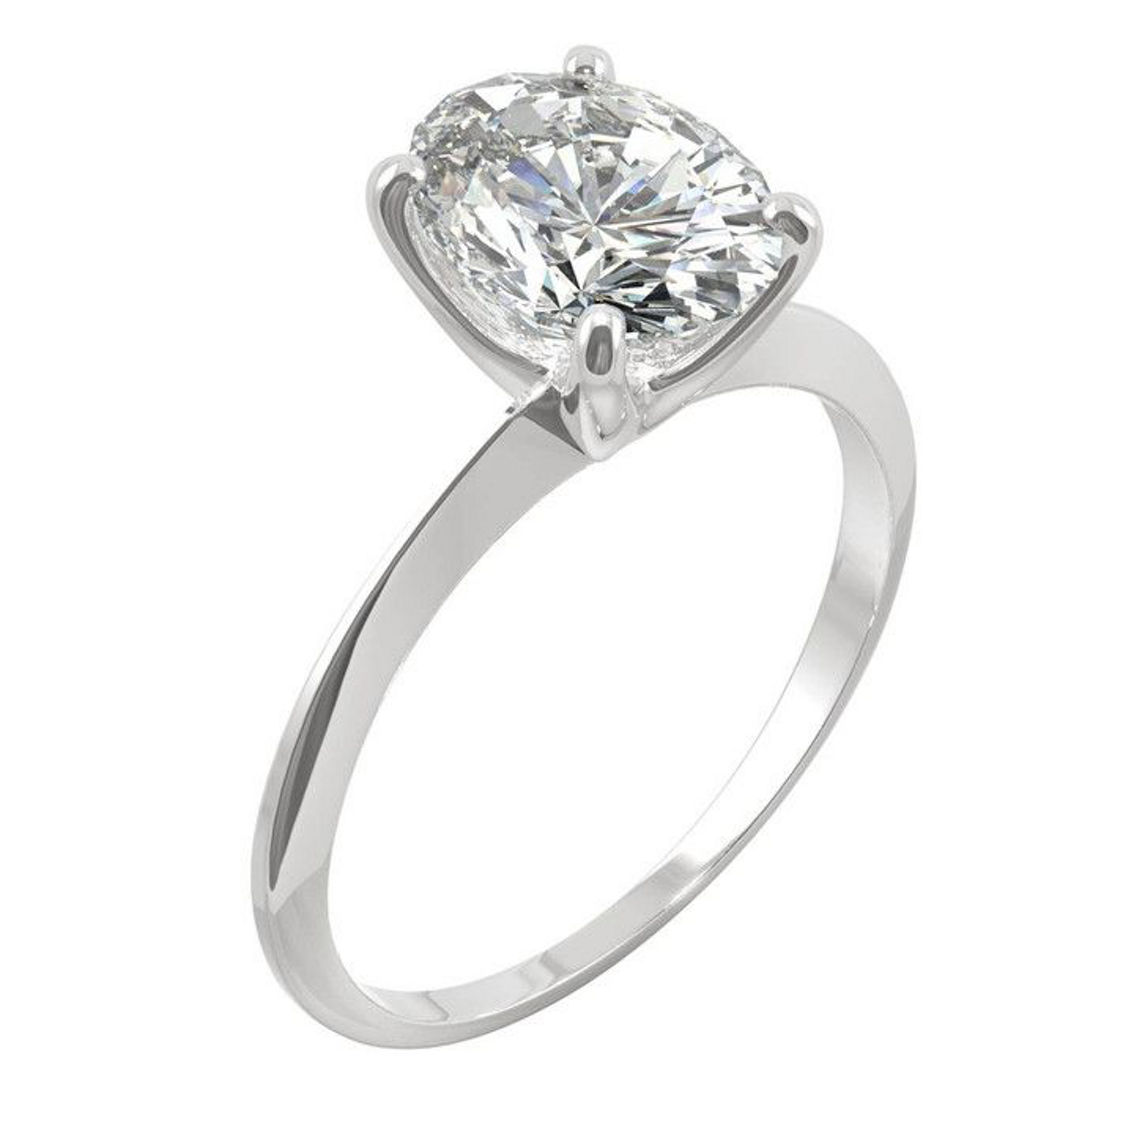 Charles & Colvard 2.10cttw Moissanite Oval Solitaire Ring in 14k White Gold - Image 2 of 5